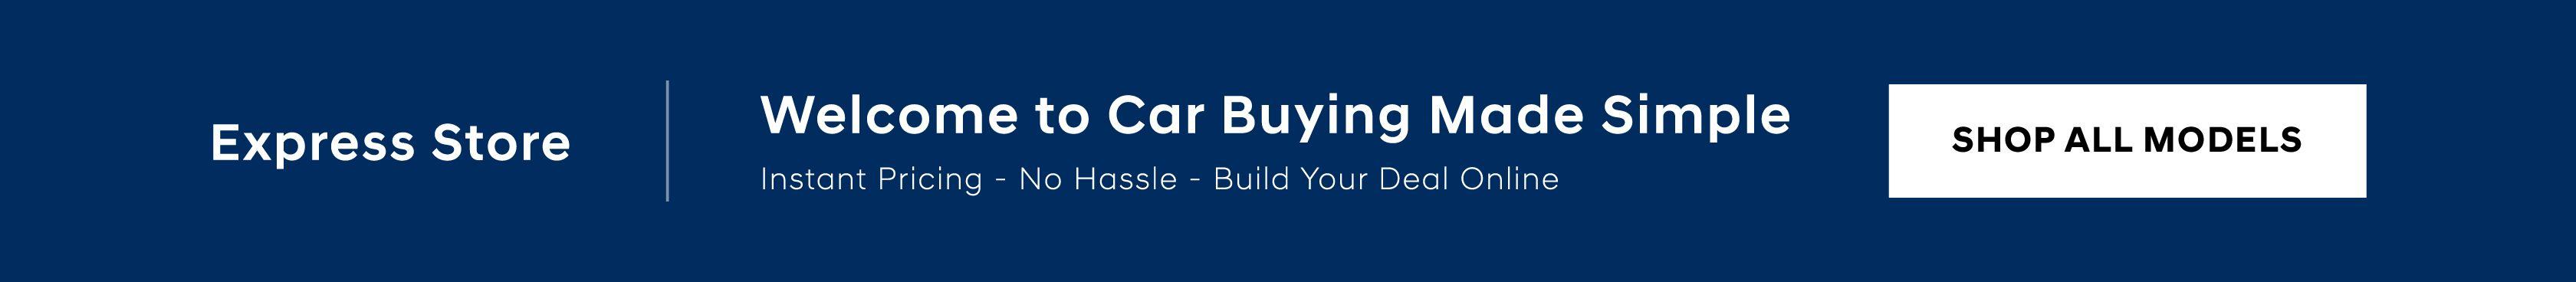 Welcome To Car Buying Made Simple